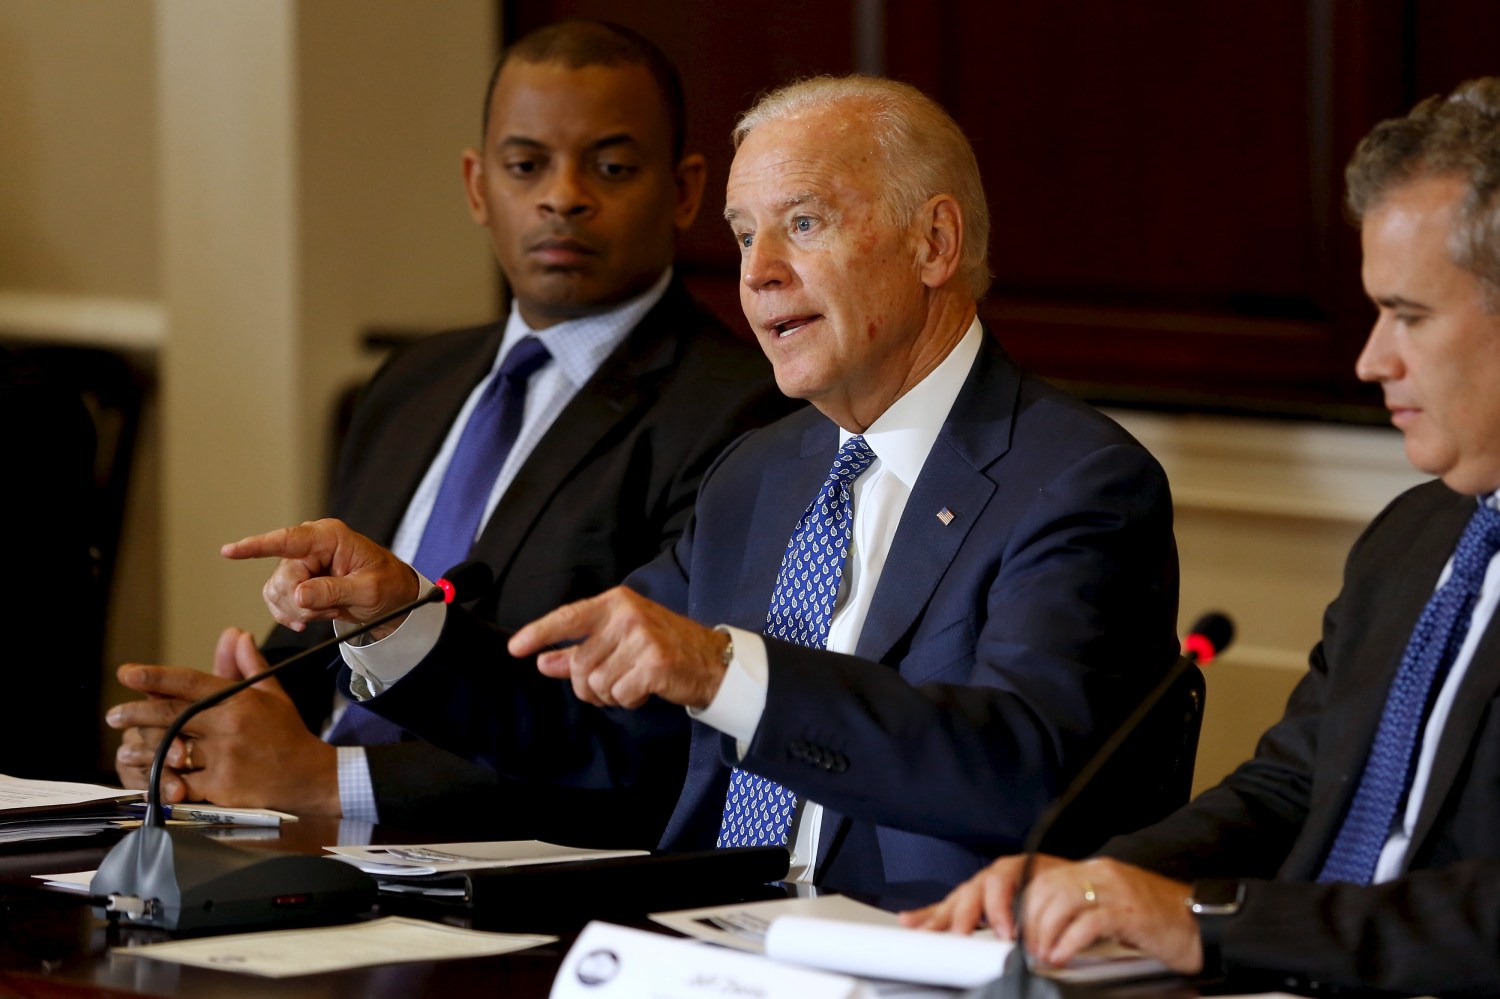 Biden, flanked by Foxx and Zients, delivers opening remarks at the White House Build America Investment Initiative Roundtable in the Eisenhower Executive Office Building in Washington